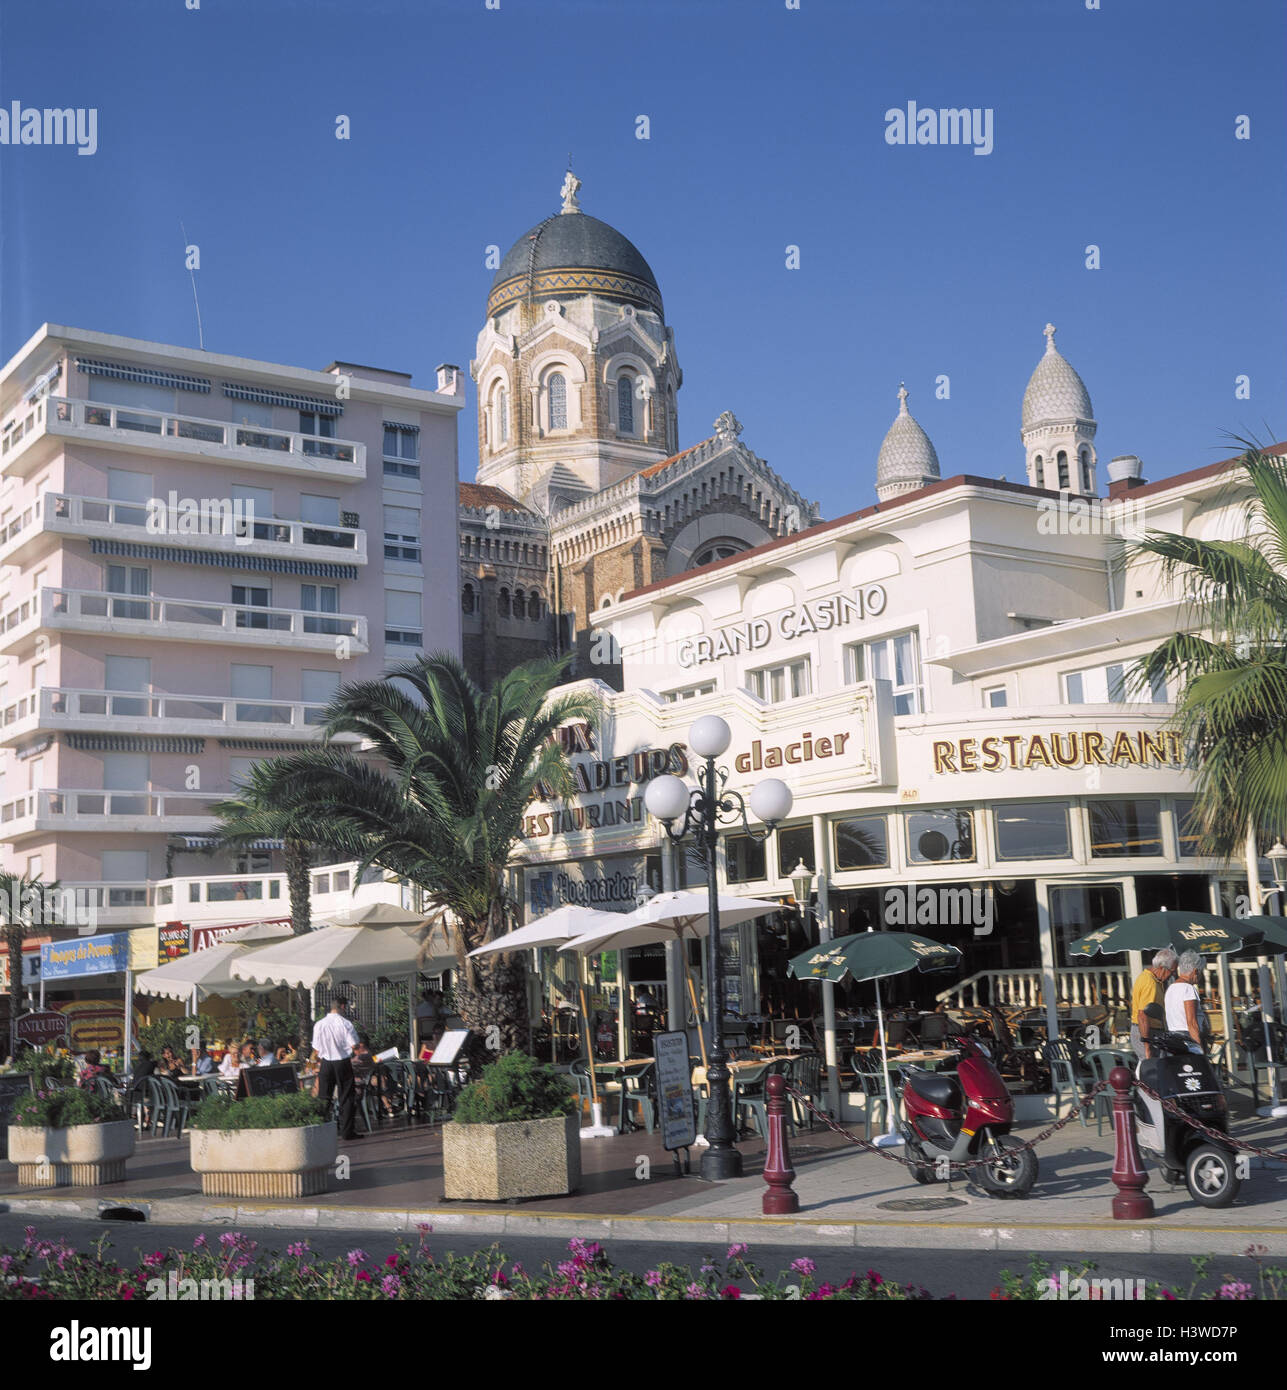 France, Riviera, St. Raphael, town view, casino, church Notre, lady, street  cafe, Europe, town, structure, architecture, cafe, guests, Passanen,  holiday resort, destination Stock Photo - Alamy